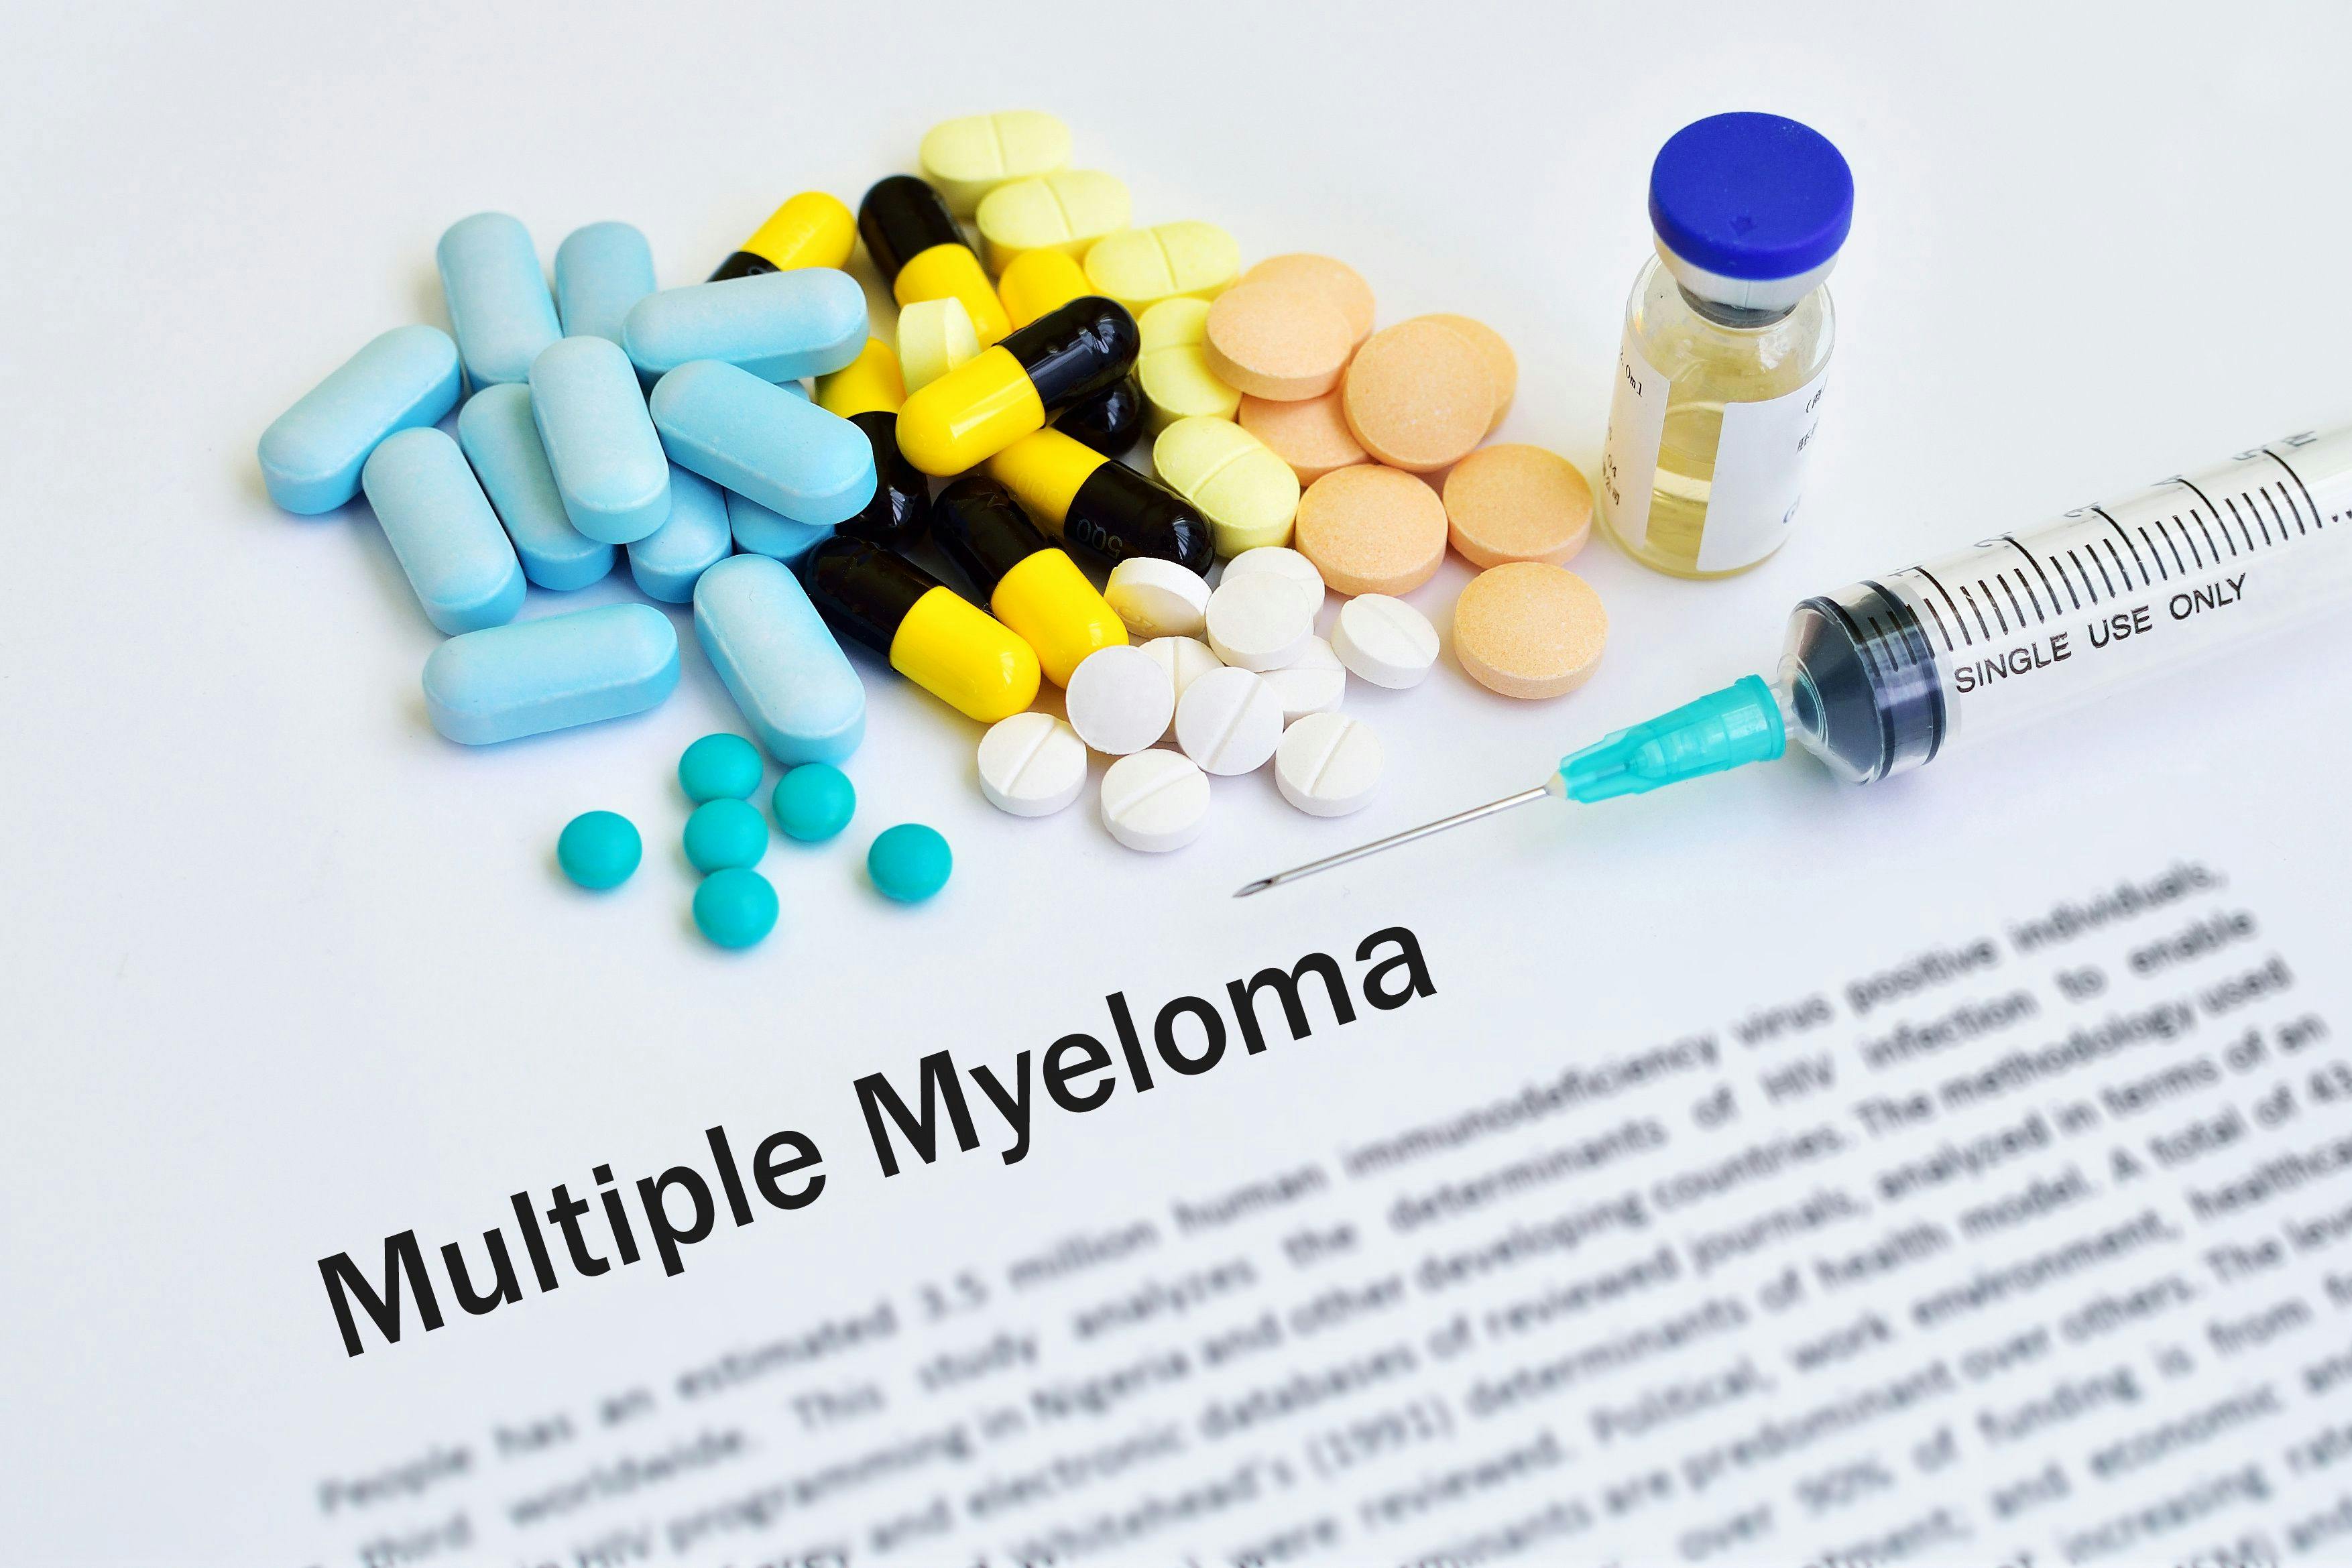 Image of a sheet of paper that says "Multiple Myeloma" with an array of colorful pills and a vial with a needle on top.